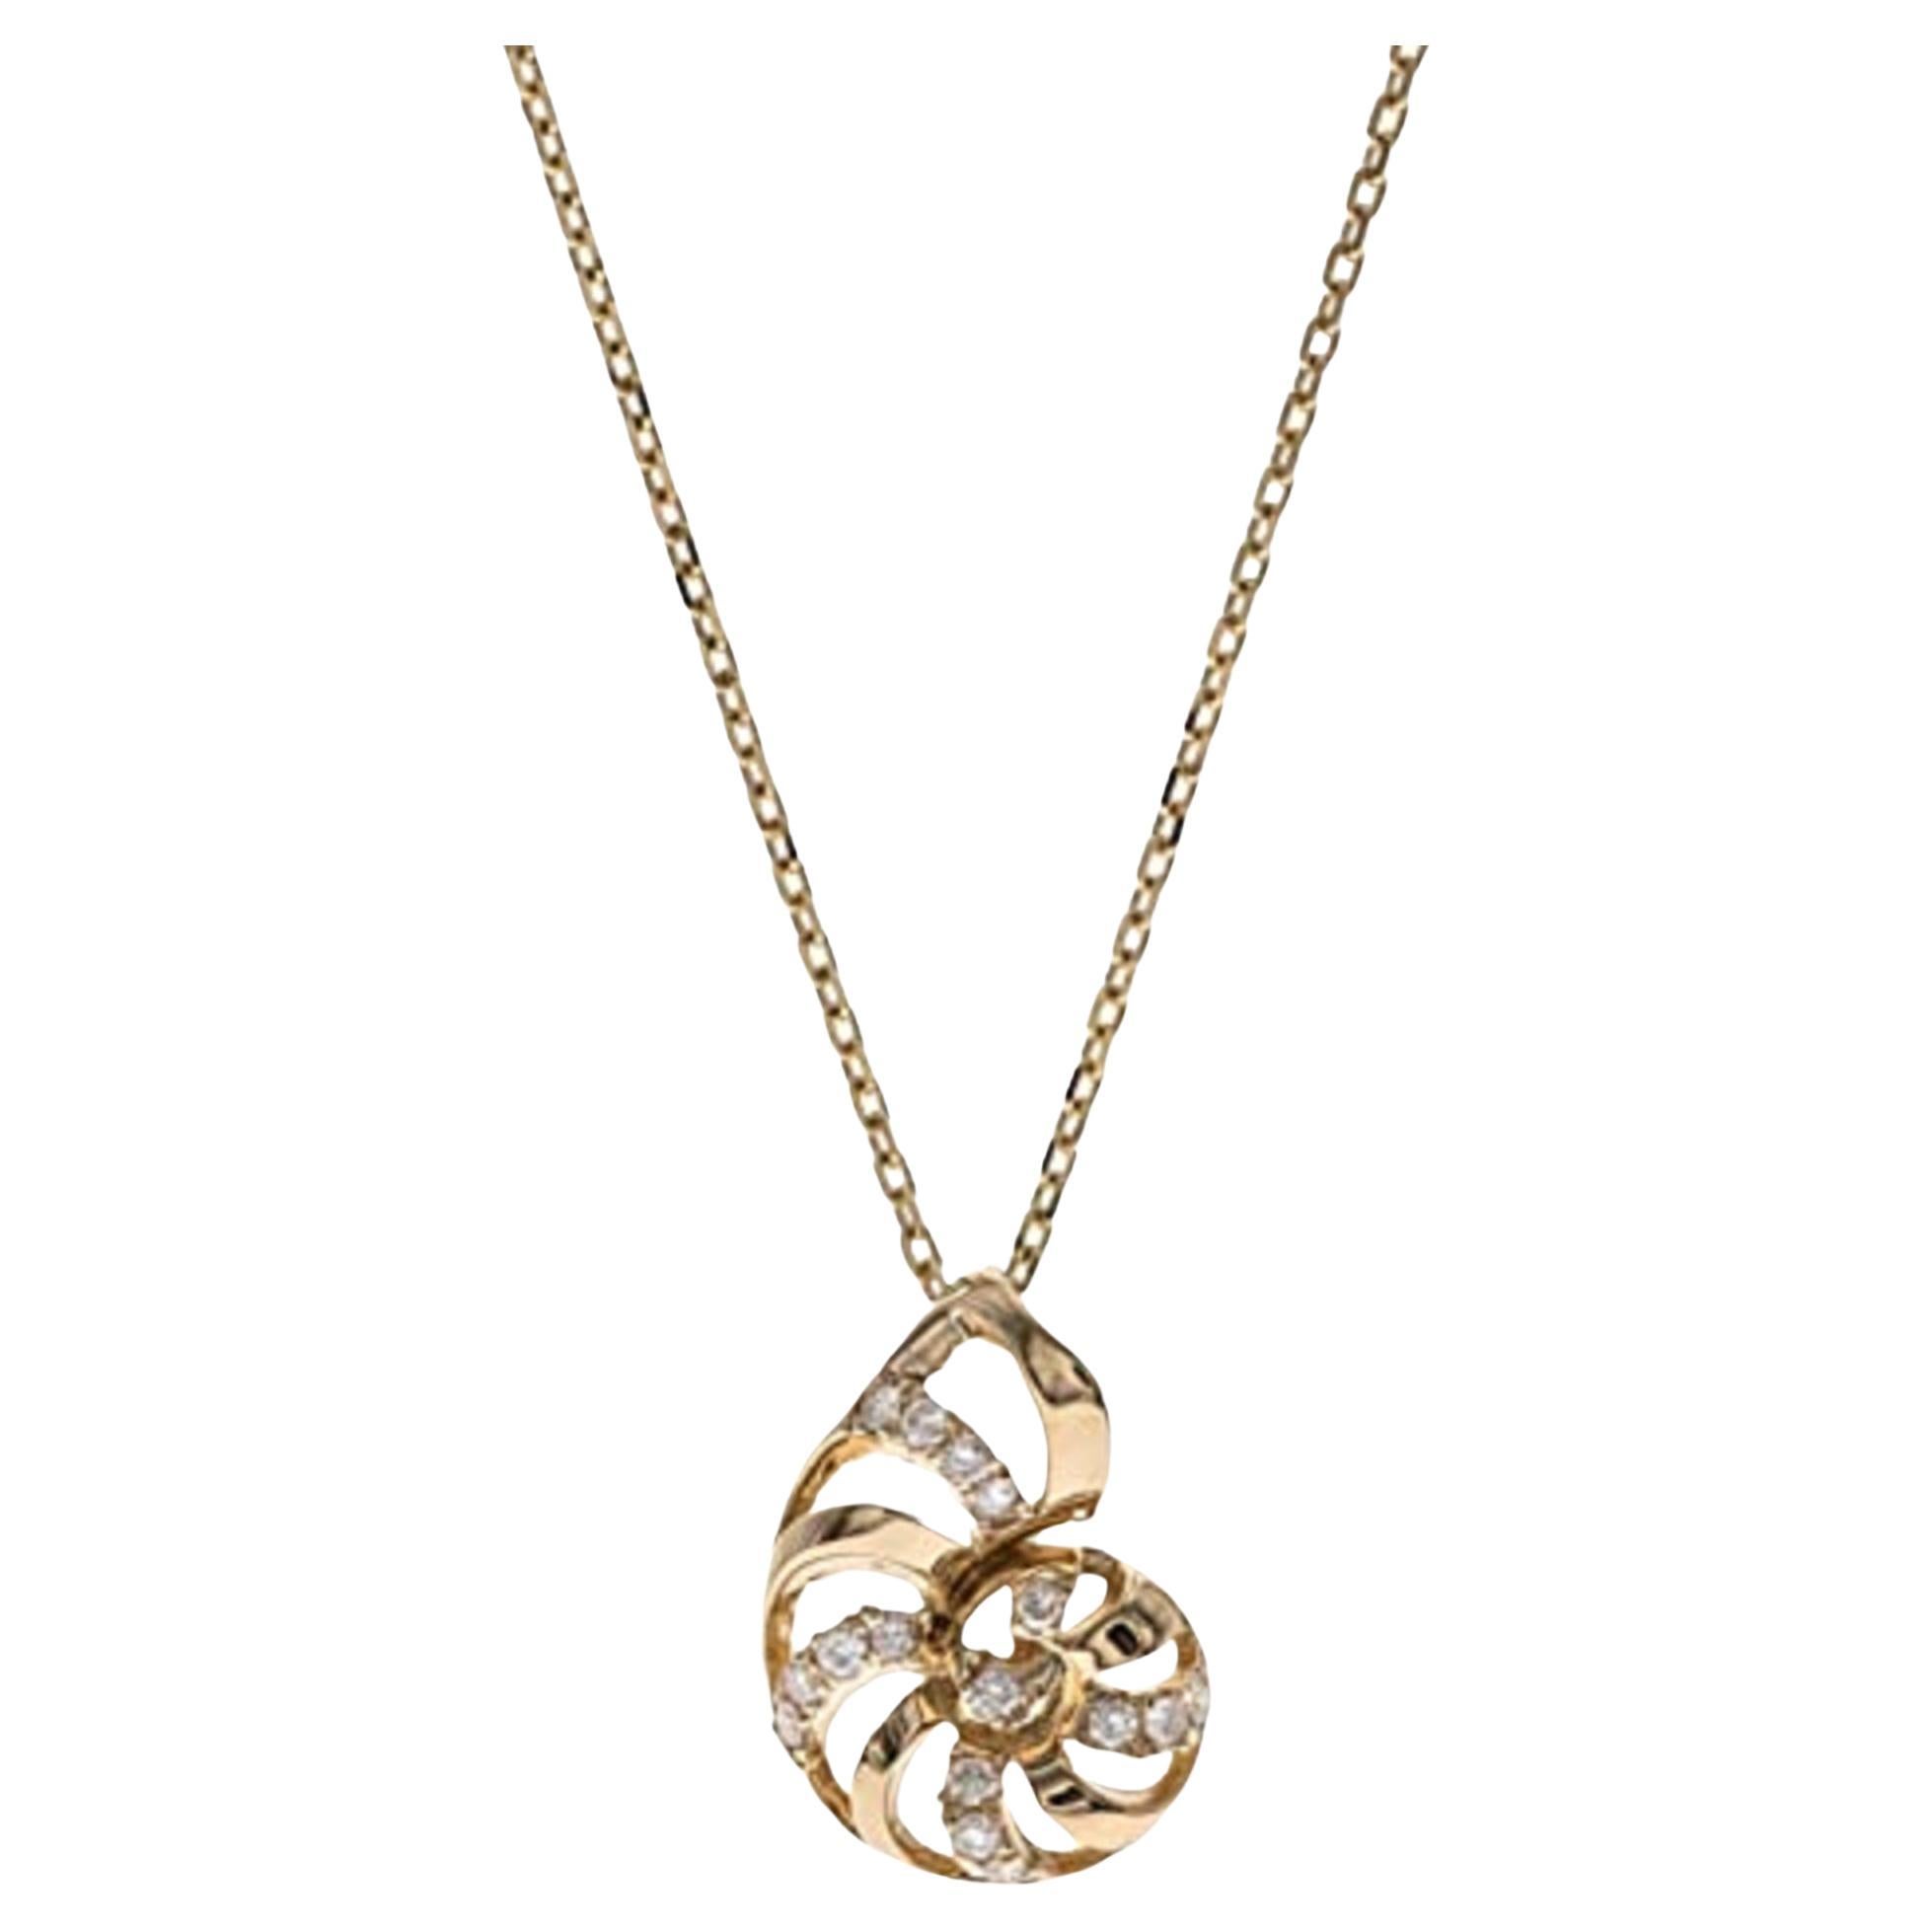 Gin and Grace pendant in 14K Yellow gold and Diamond for exclusive everyday look